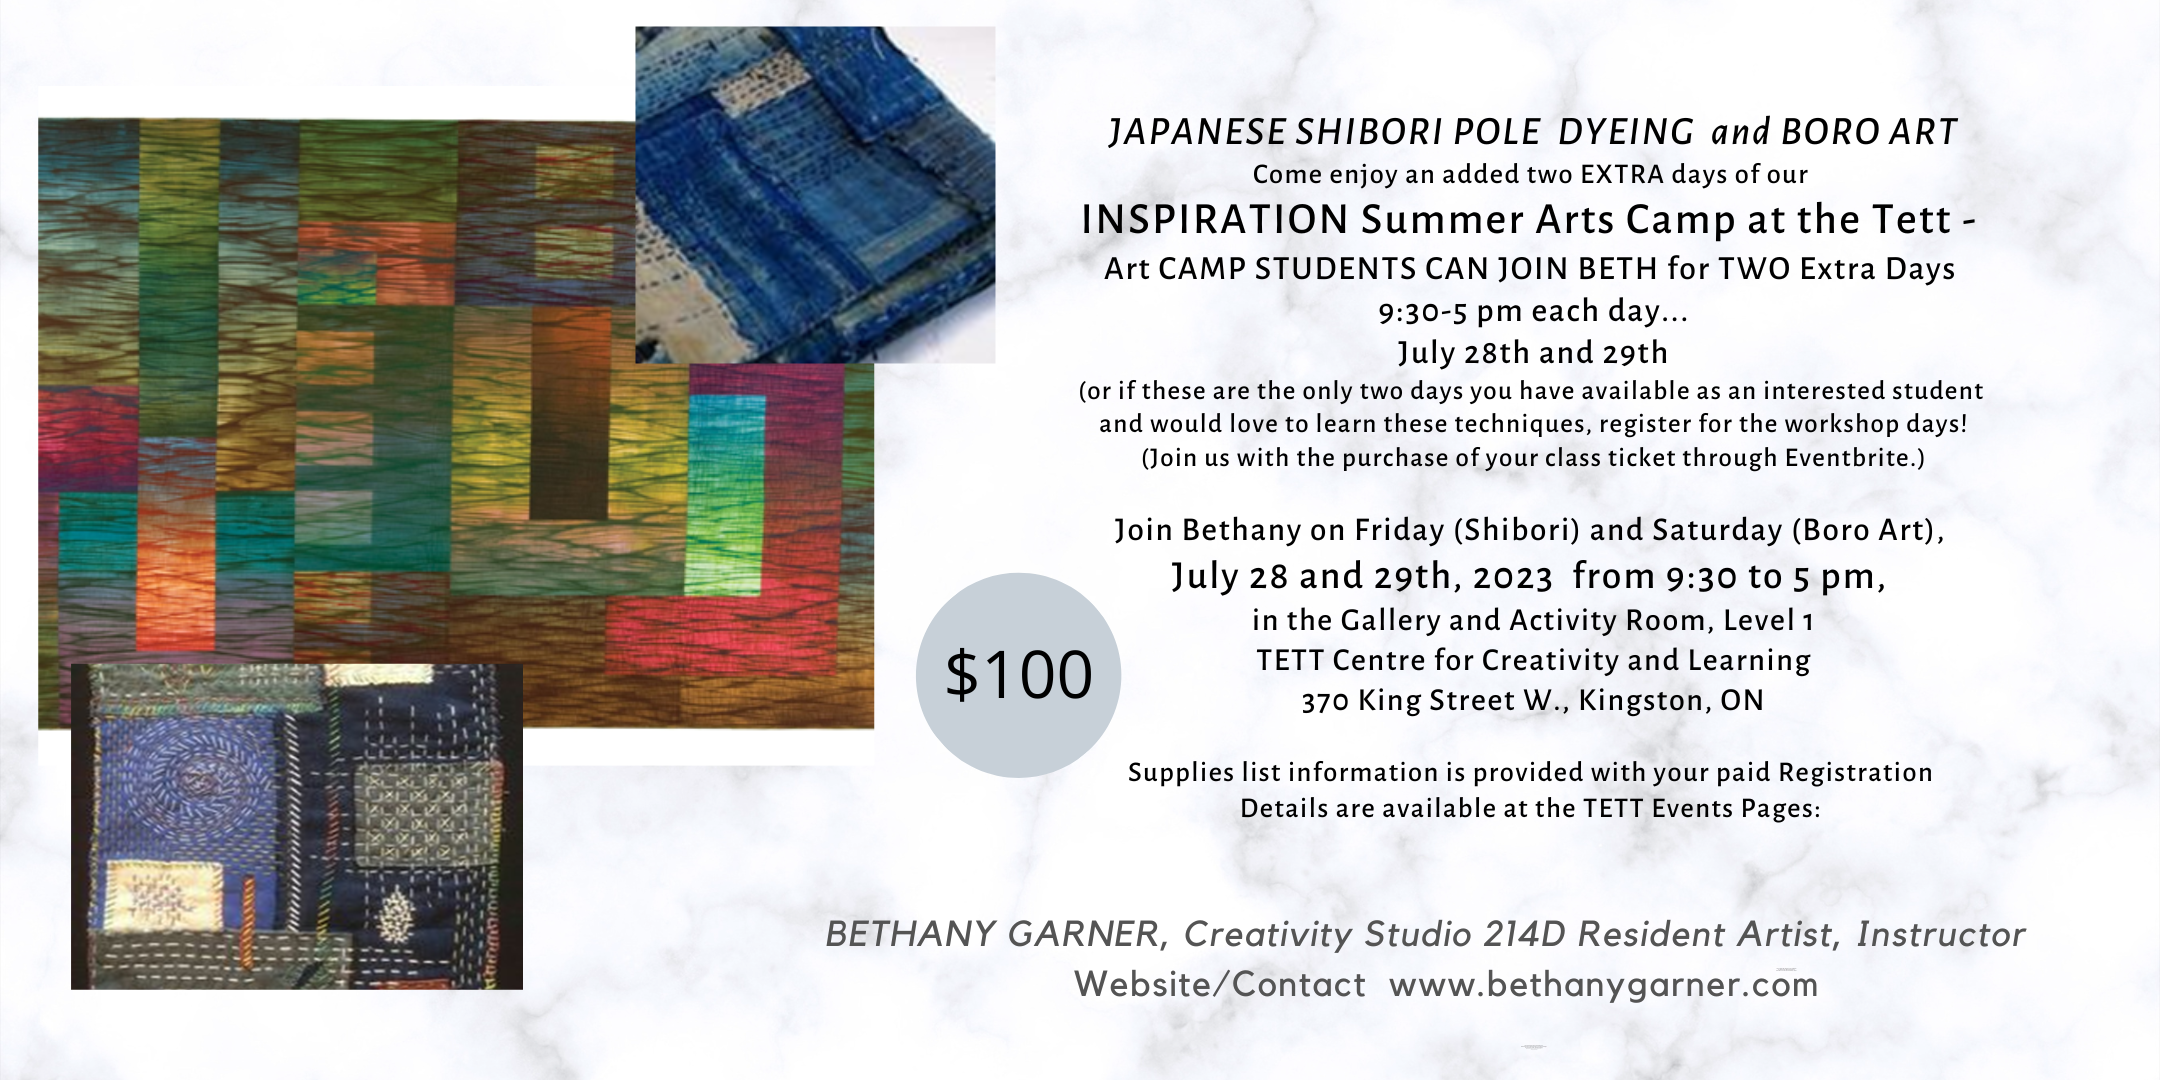 JAPANESE SHIBORI POLE DYENG and BORO ART, Eventbrite Poster for 2 day Camp